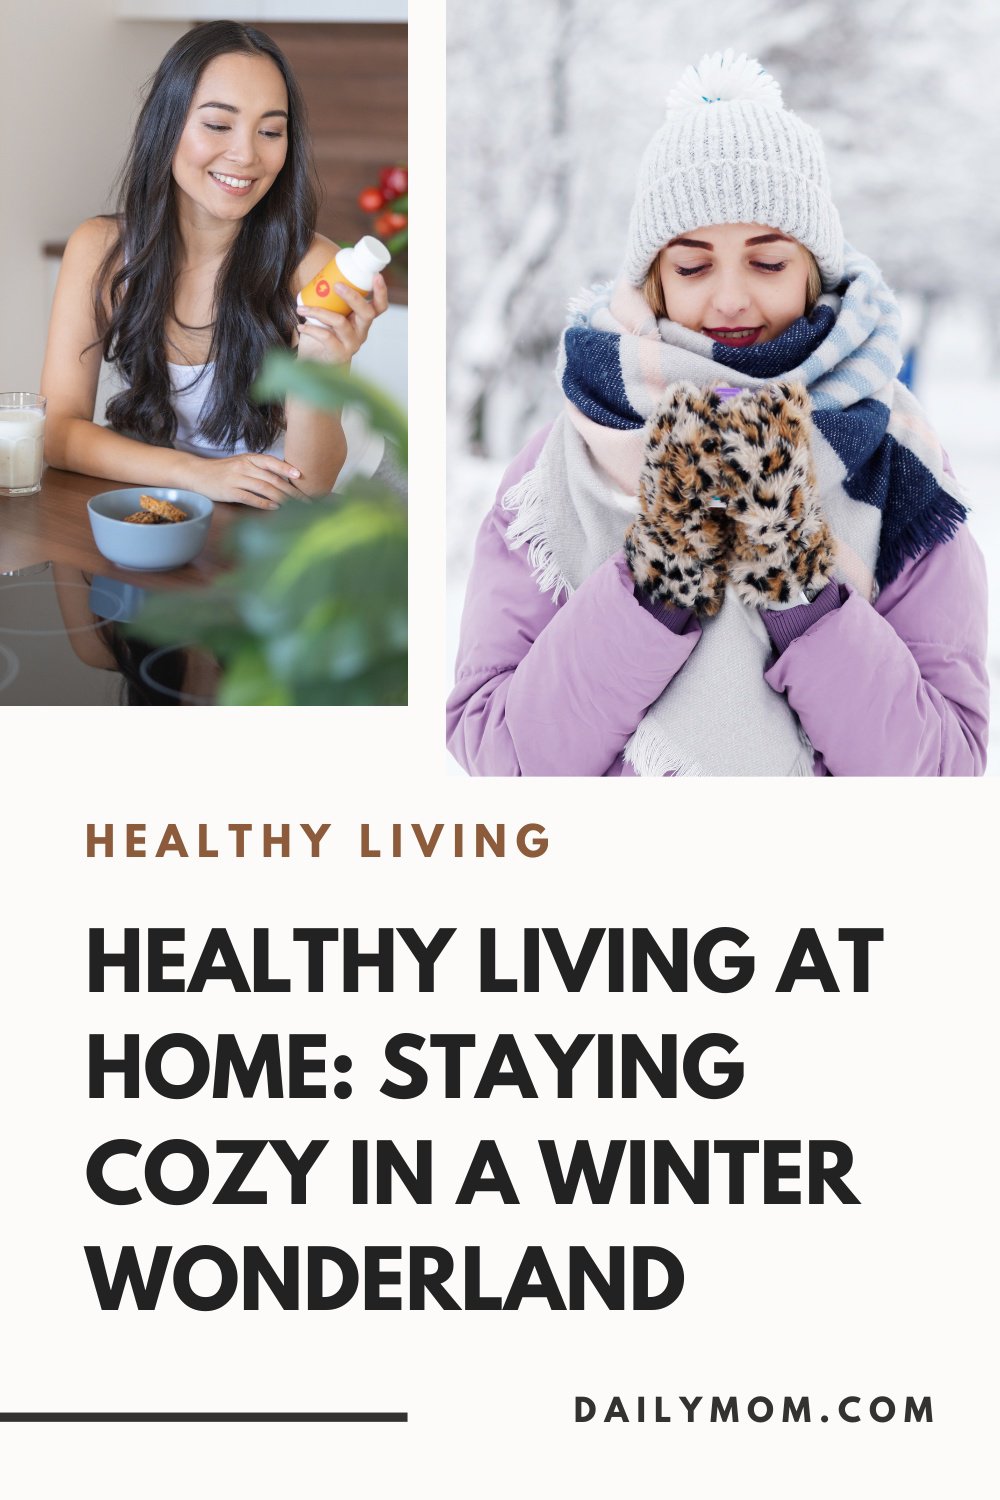 22 Best Gifts to Promote Healthy Living at Home 69 Daily Mom, Magazine for Families